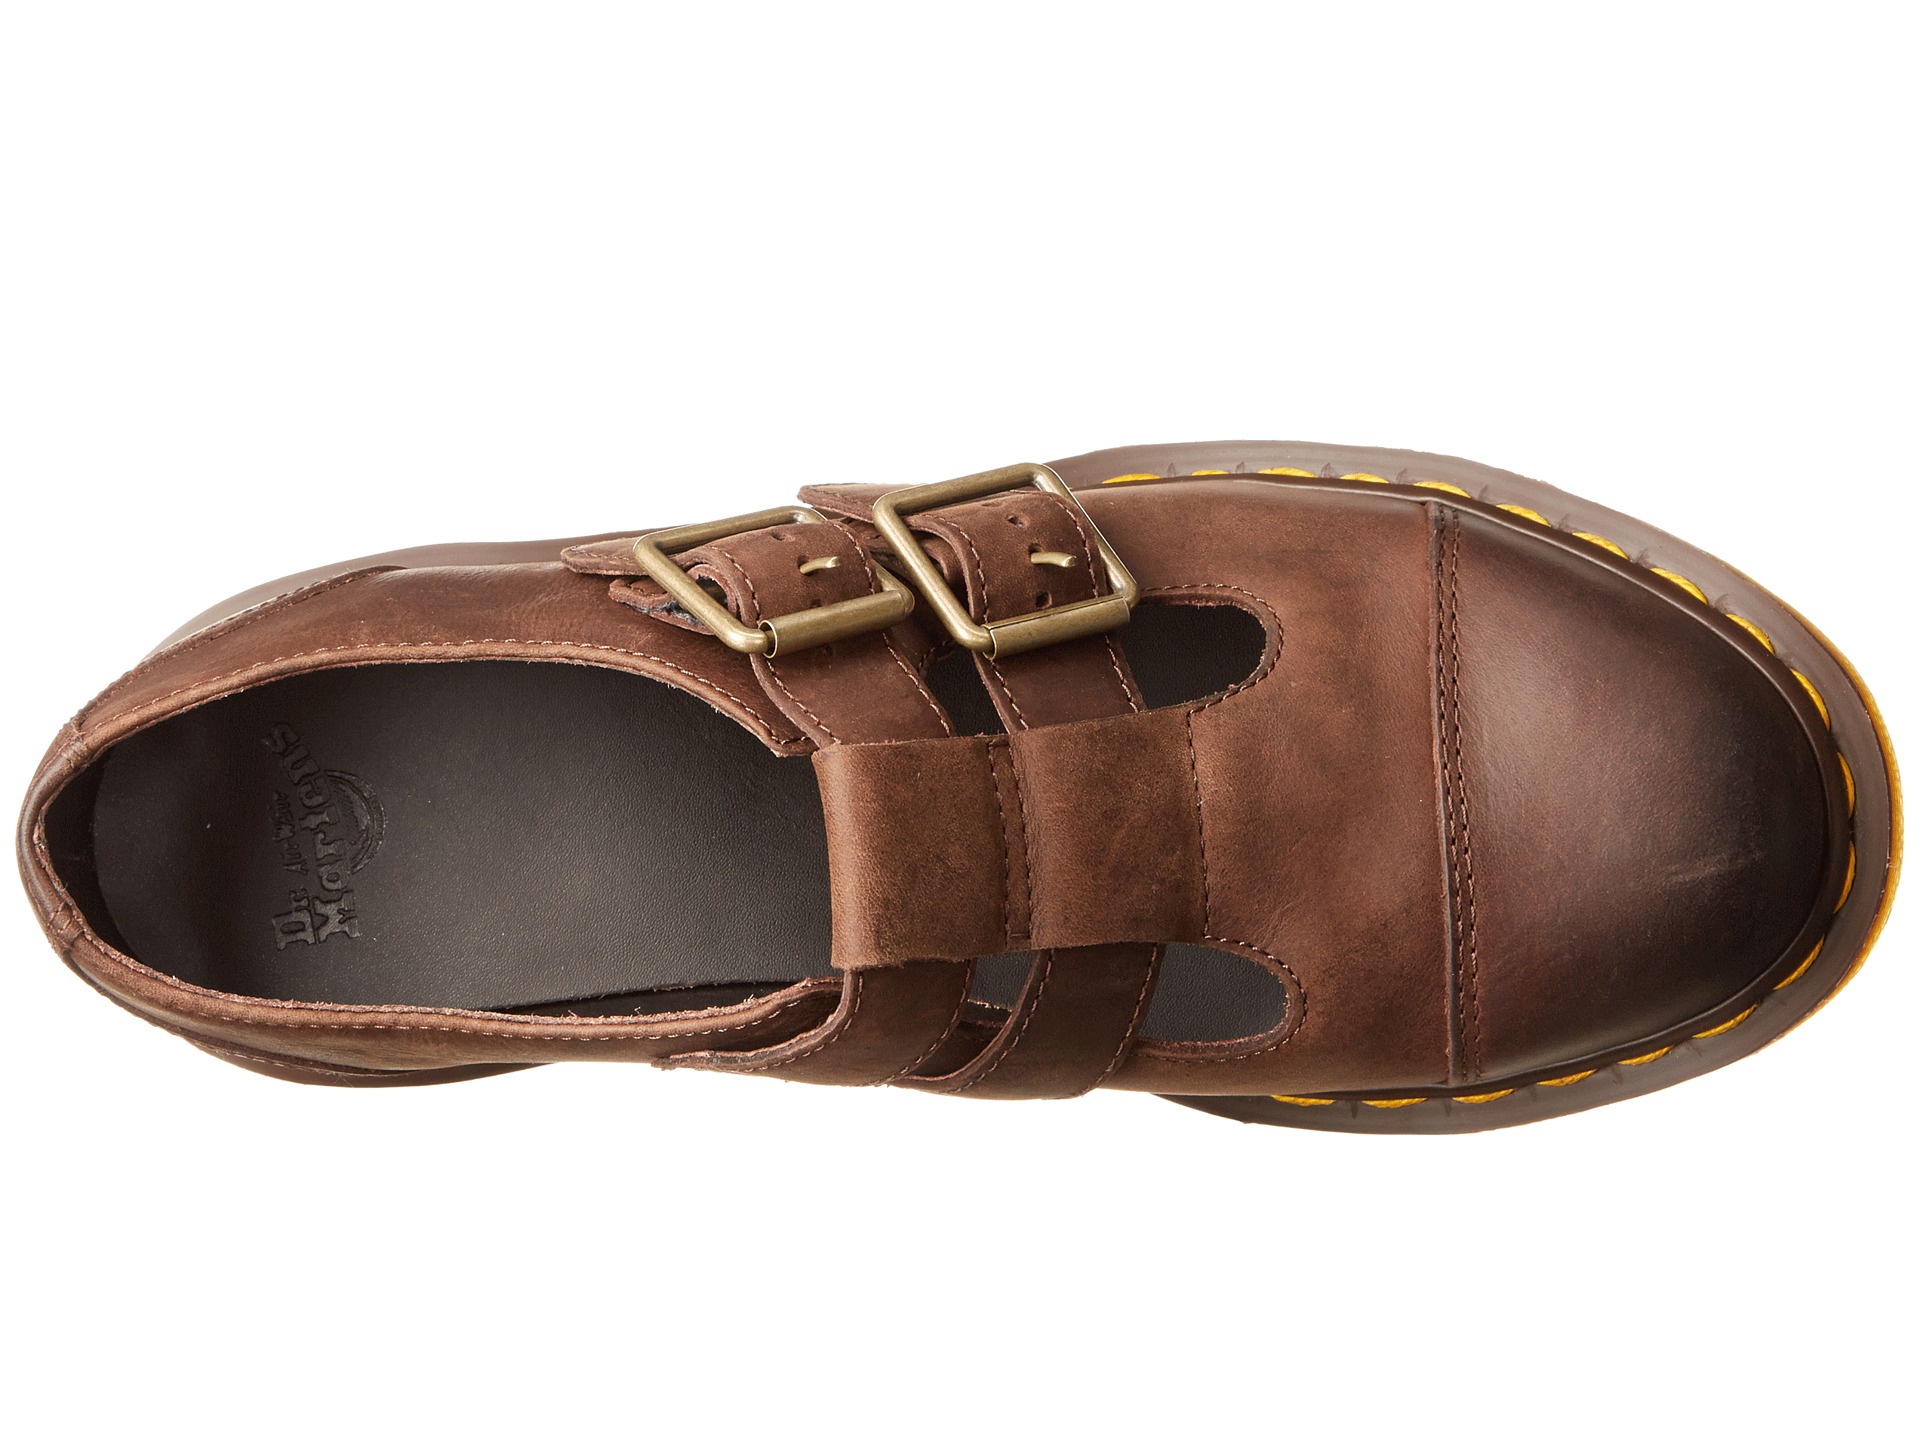 Dr Martens Ivy Double Strap T Bar | Shipped Free at Zappos